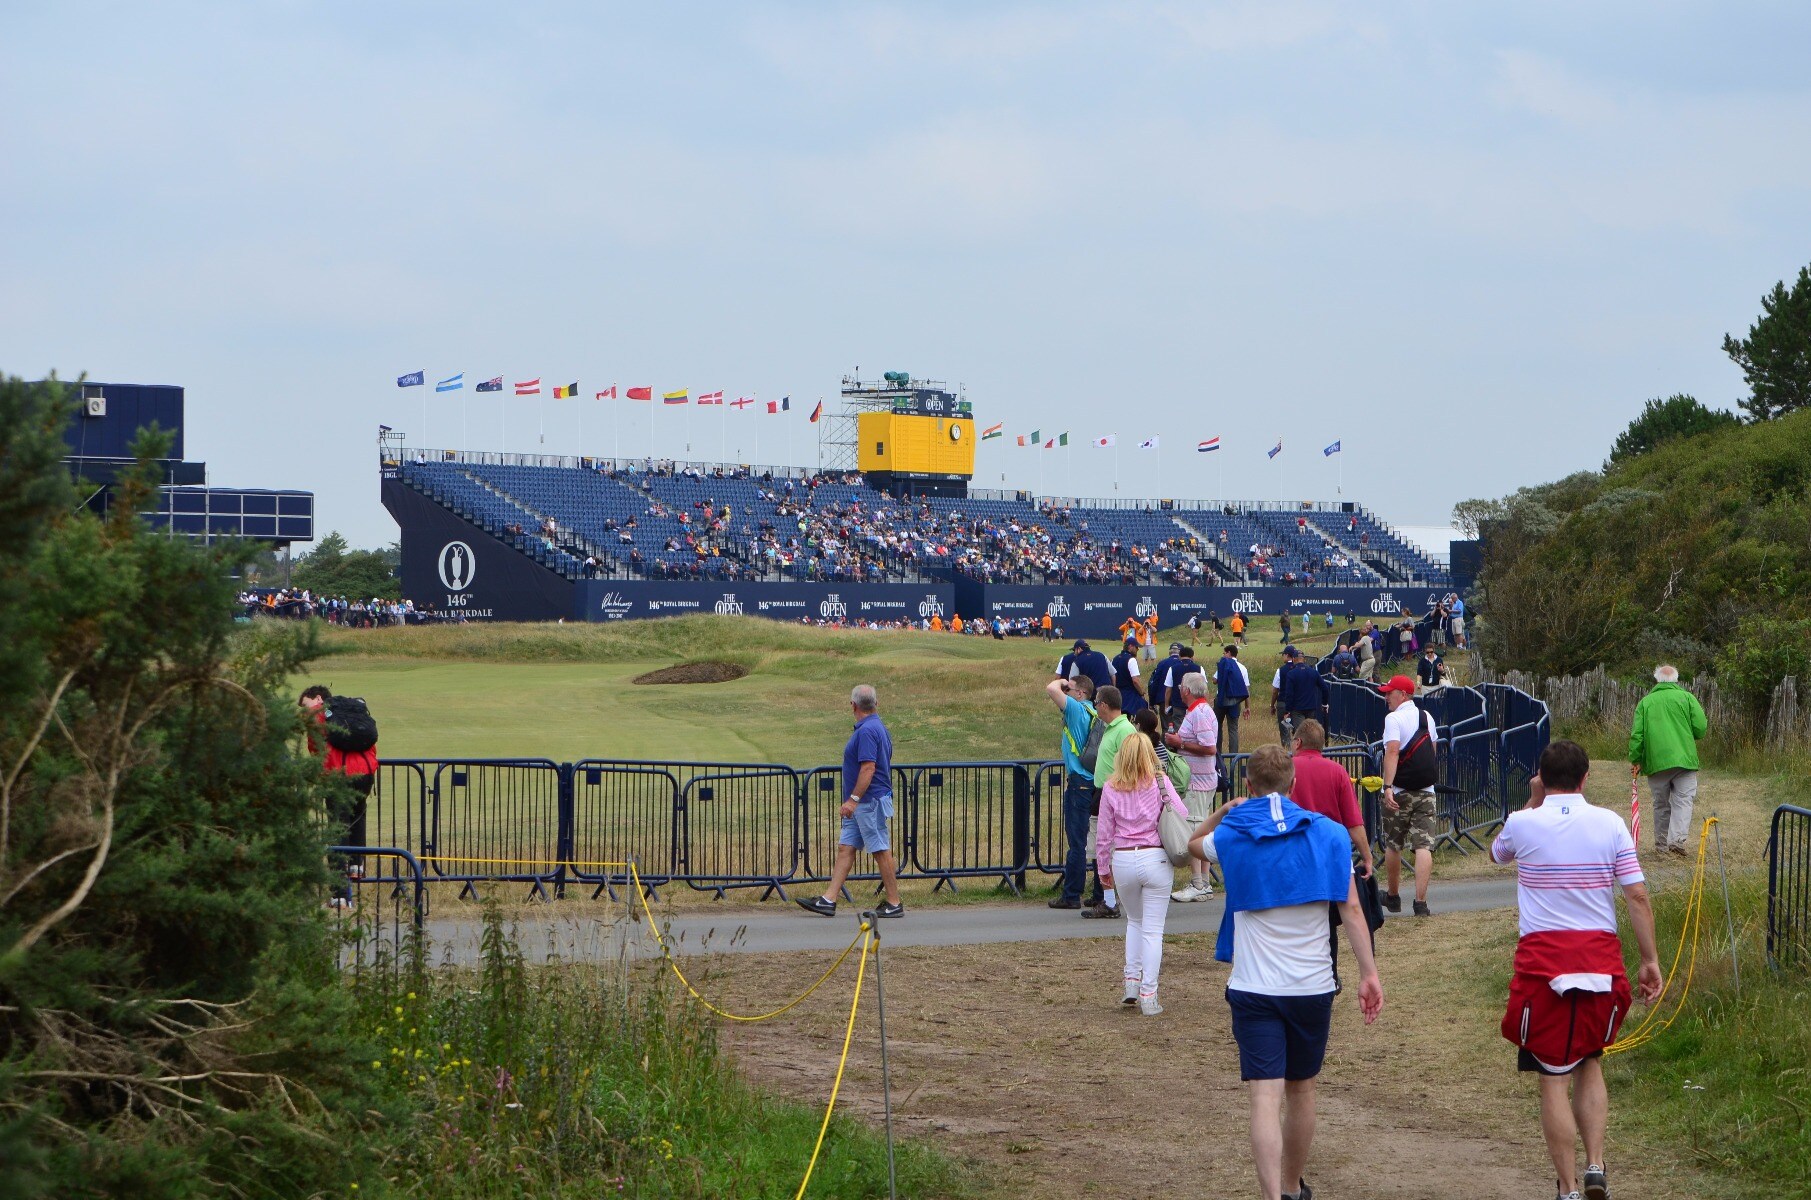 A look down the 18th hole... crowds a plenty